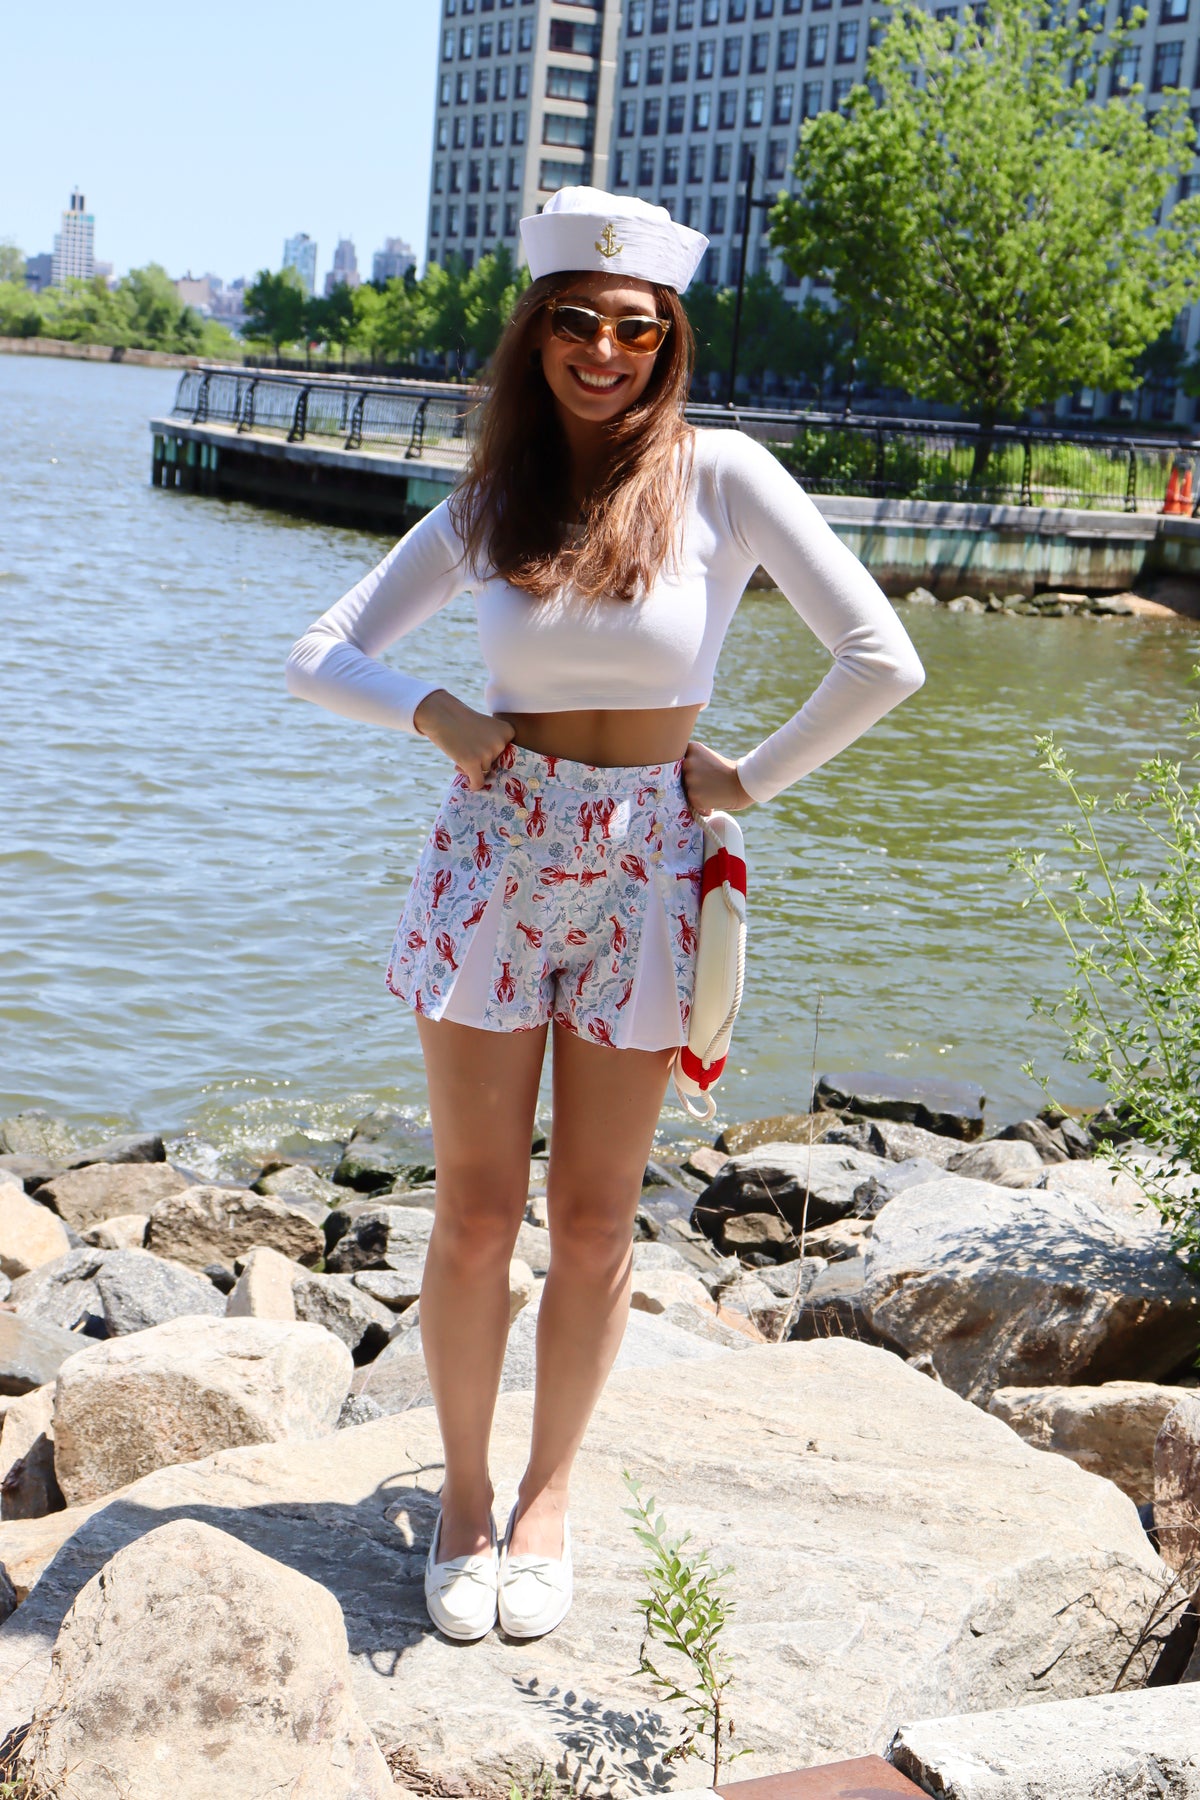 Model wearing pleated blue and red lobster print cotton shorts and white long sleeve crop top with her hands on her hips, standing on rocks in front of a river, smiling.